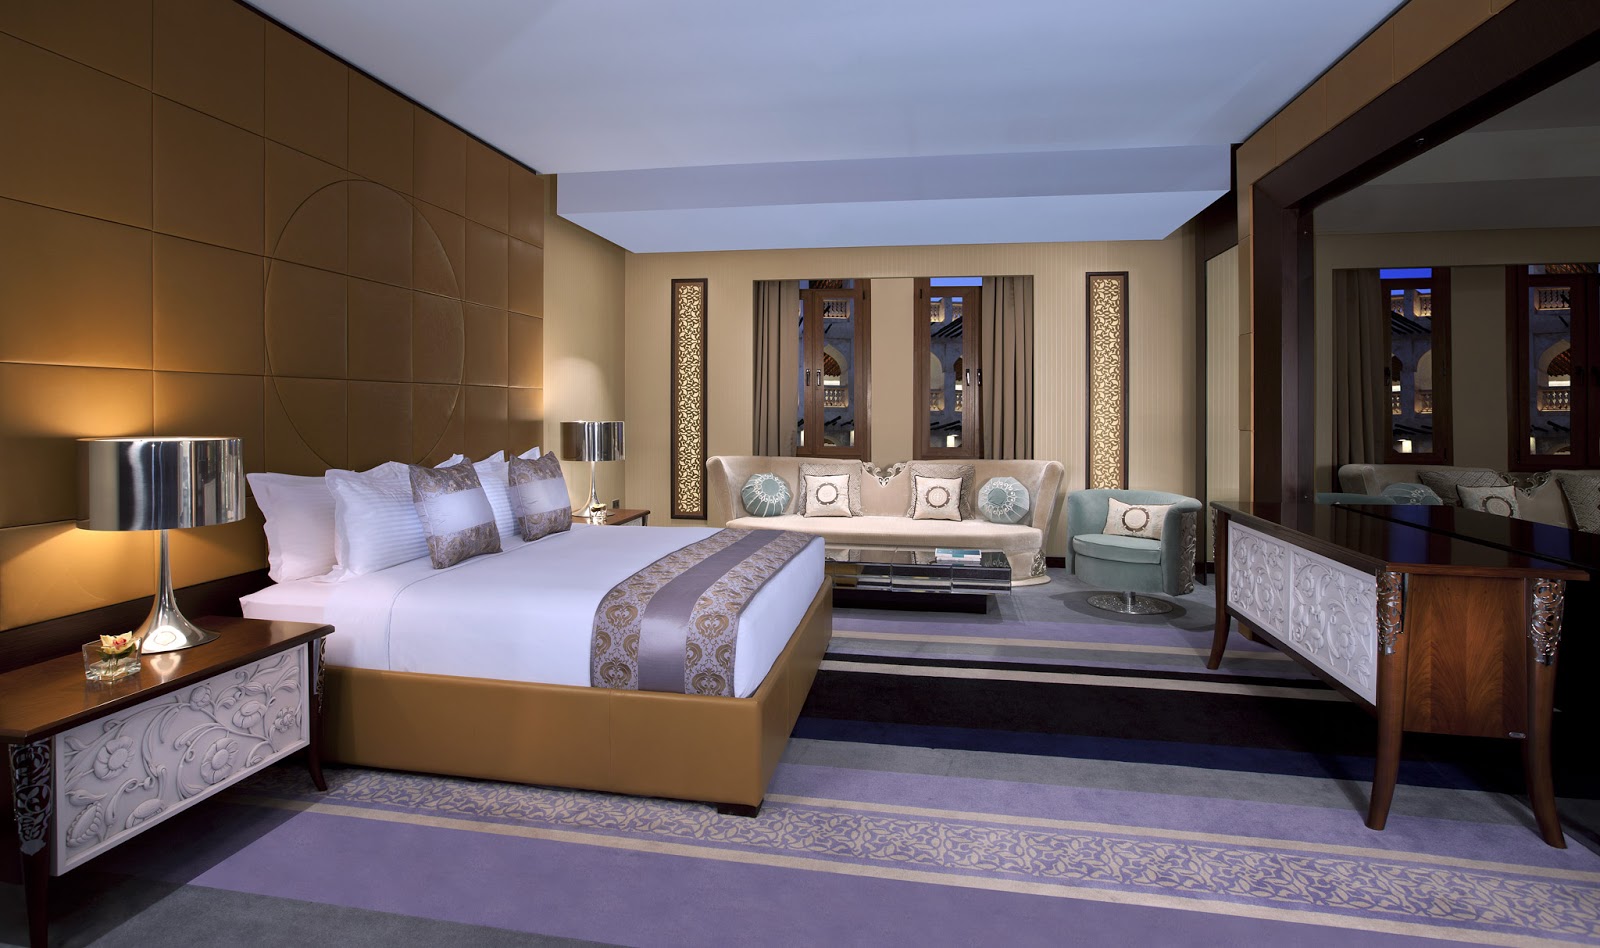 One of the bedroom in Al Mirqab super yacht